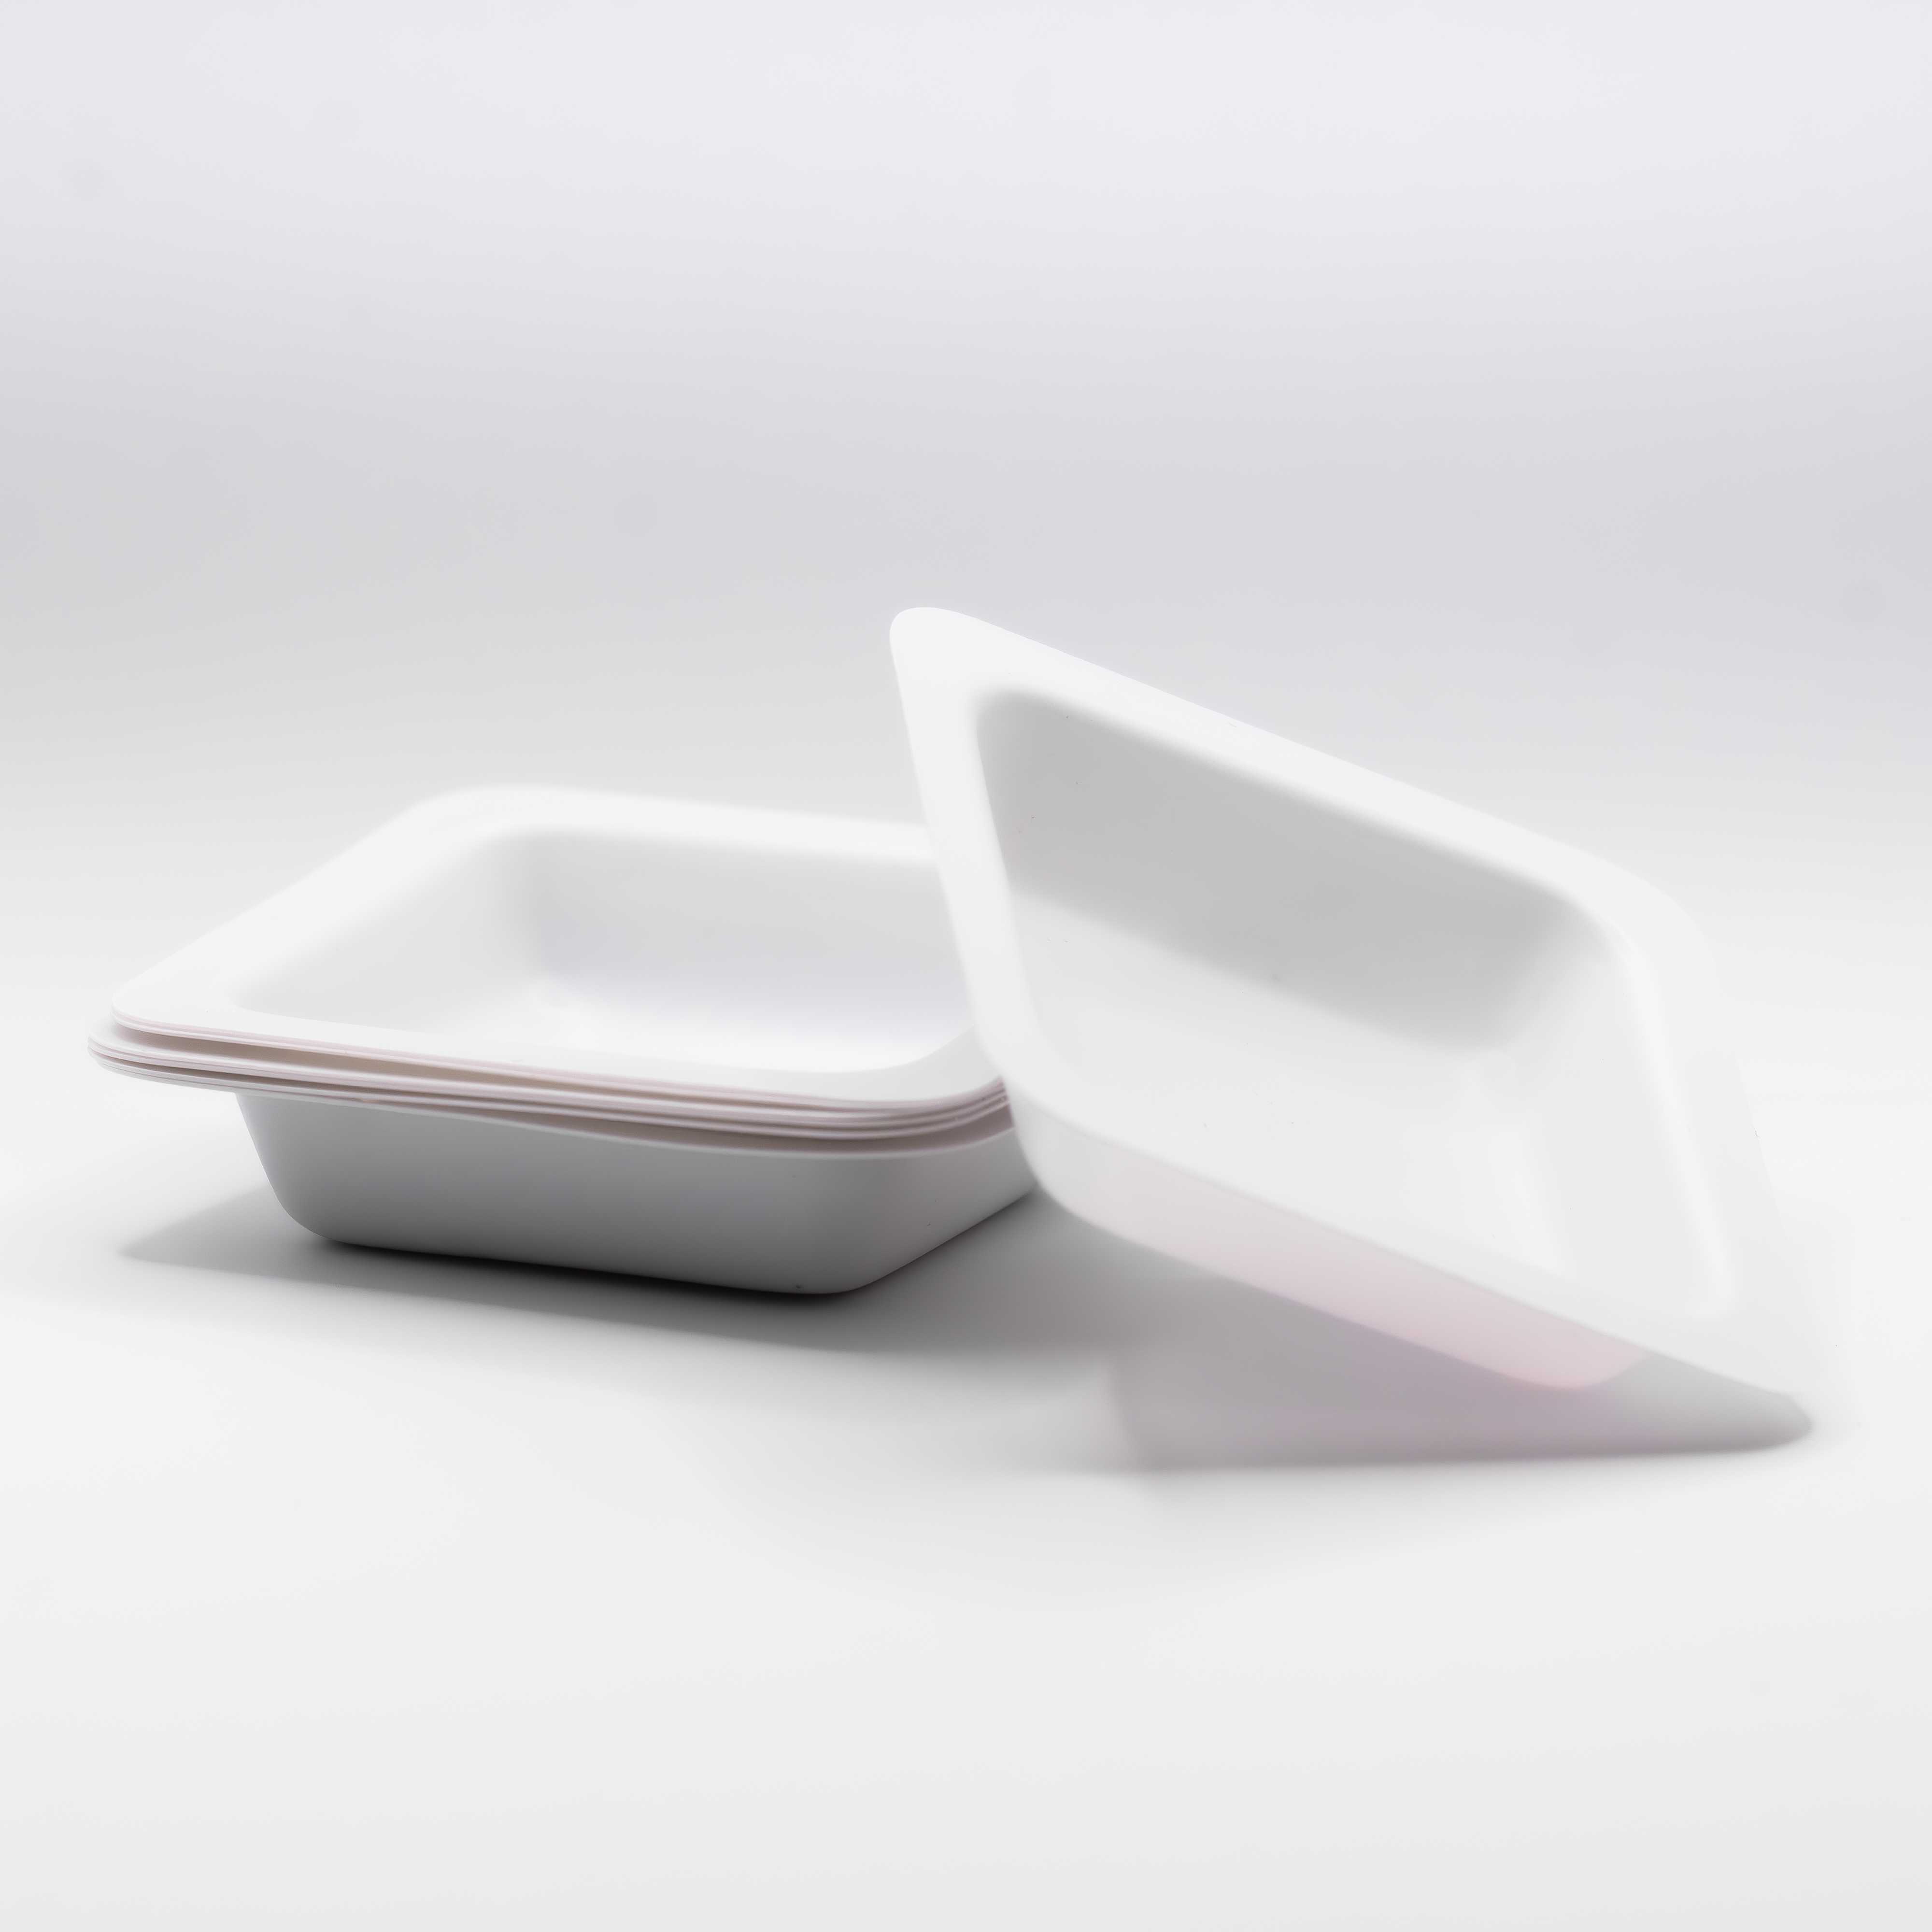 A small pile of disposable containers on a white background